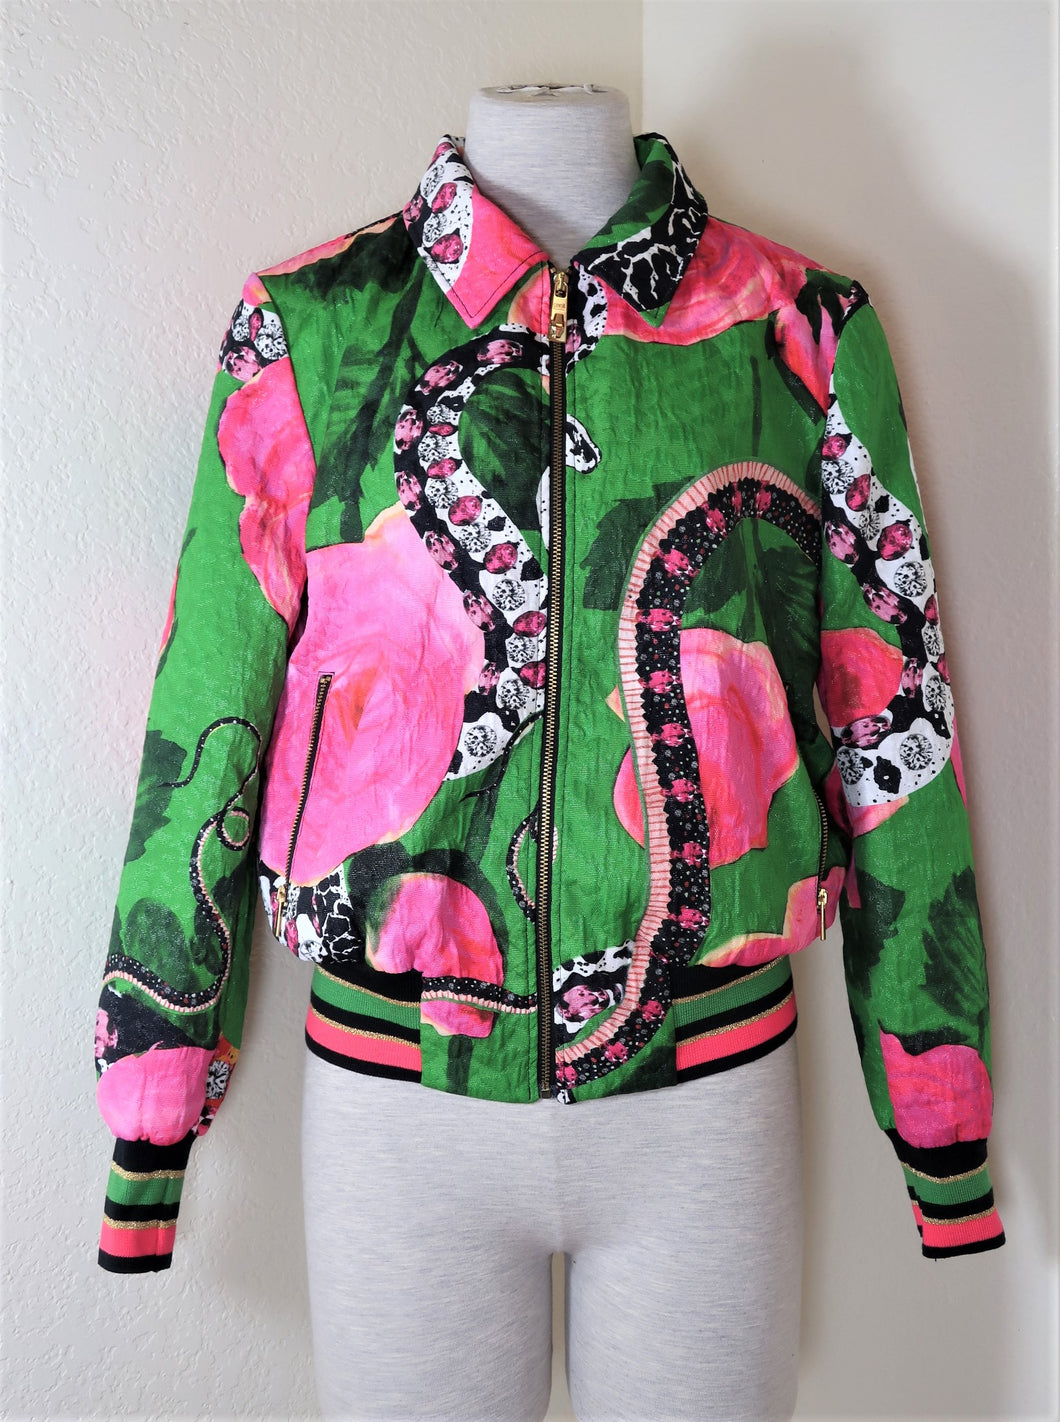 Roberto Cavalli Class Colorful Floral Zip Jacket Red Green Top Outer Sz 4 40